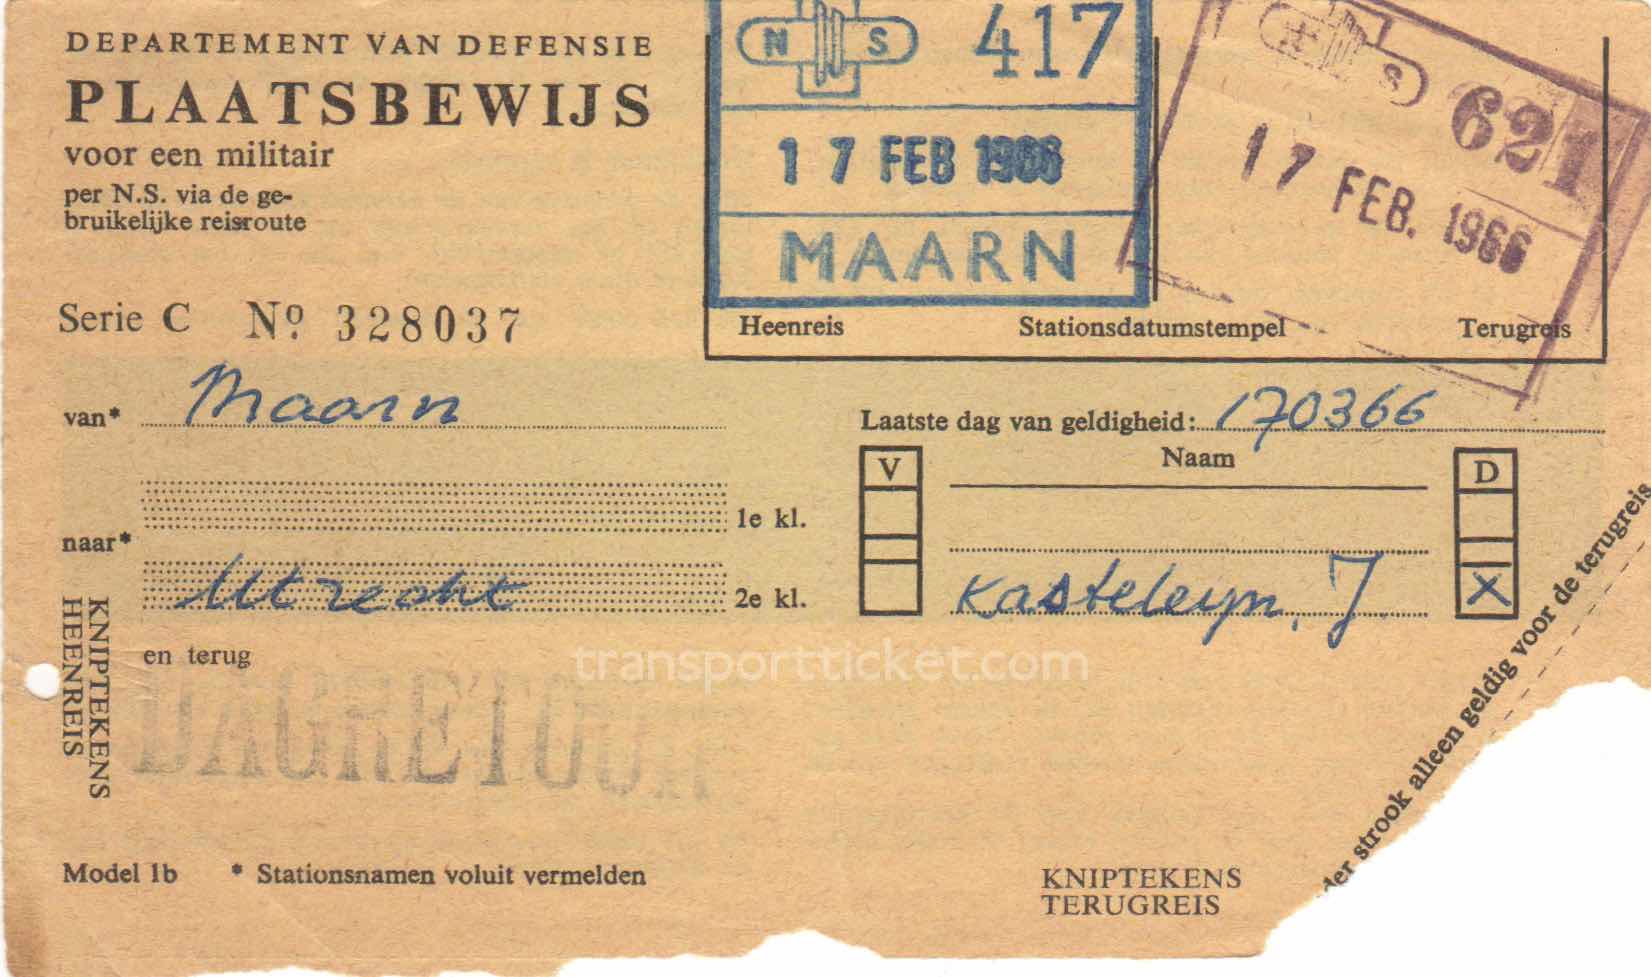 transport ticket issued by Dutch Department of Defense (1966)